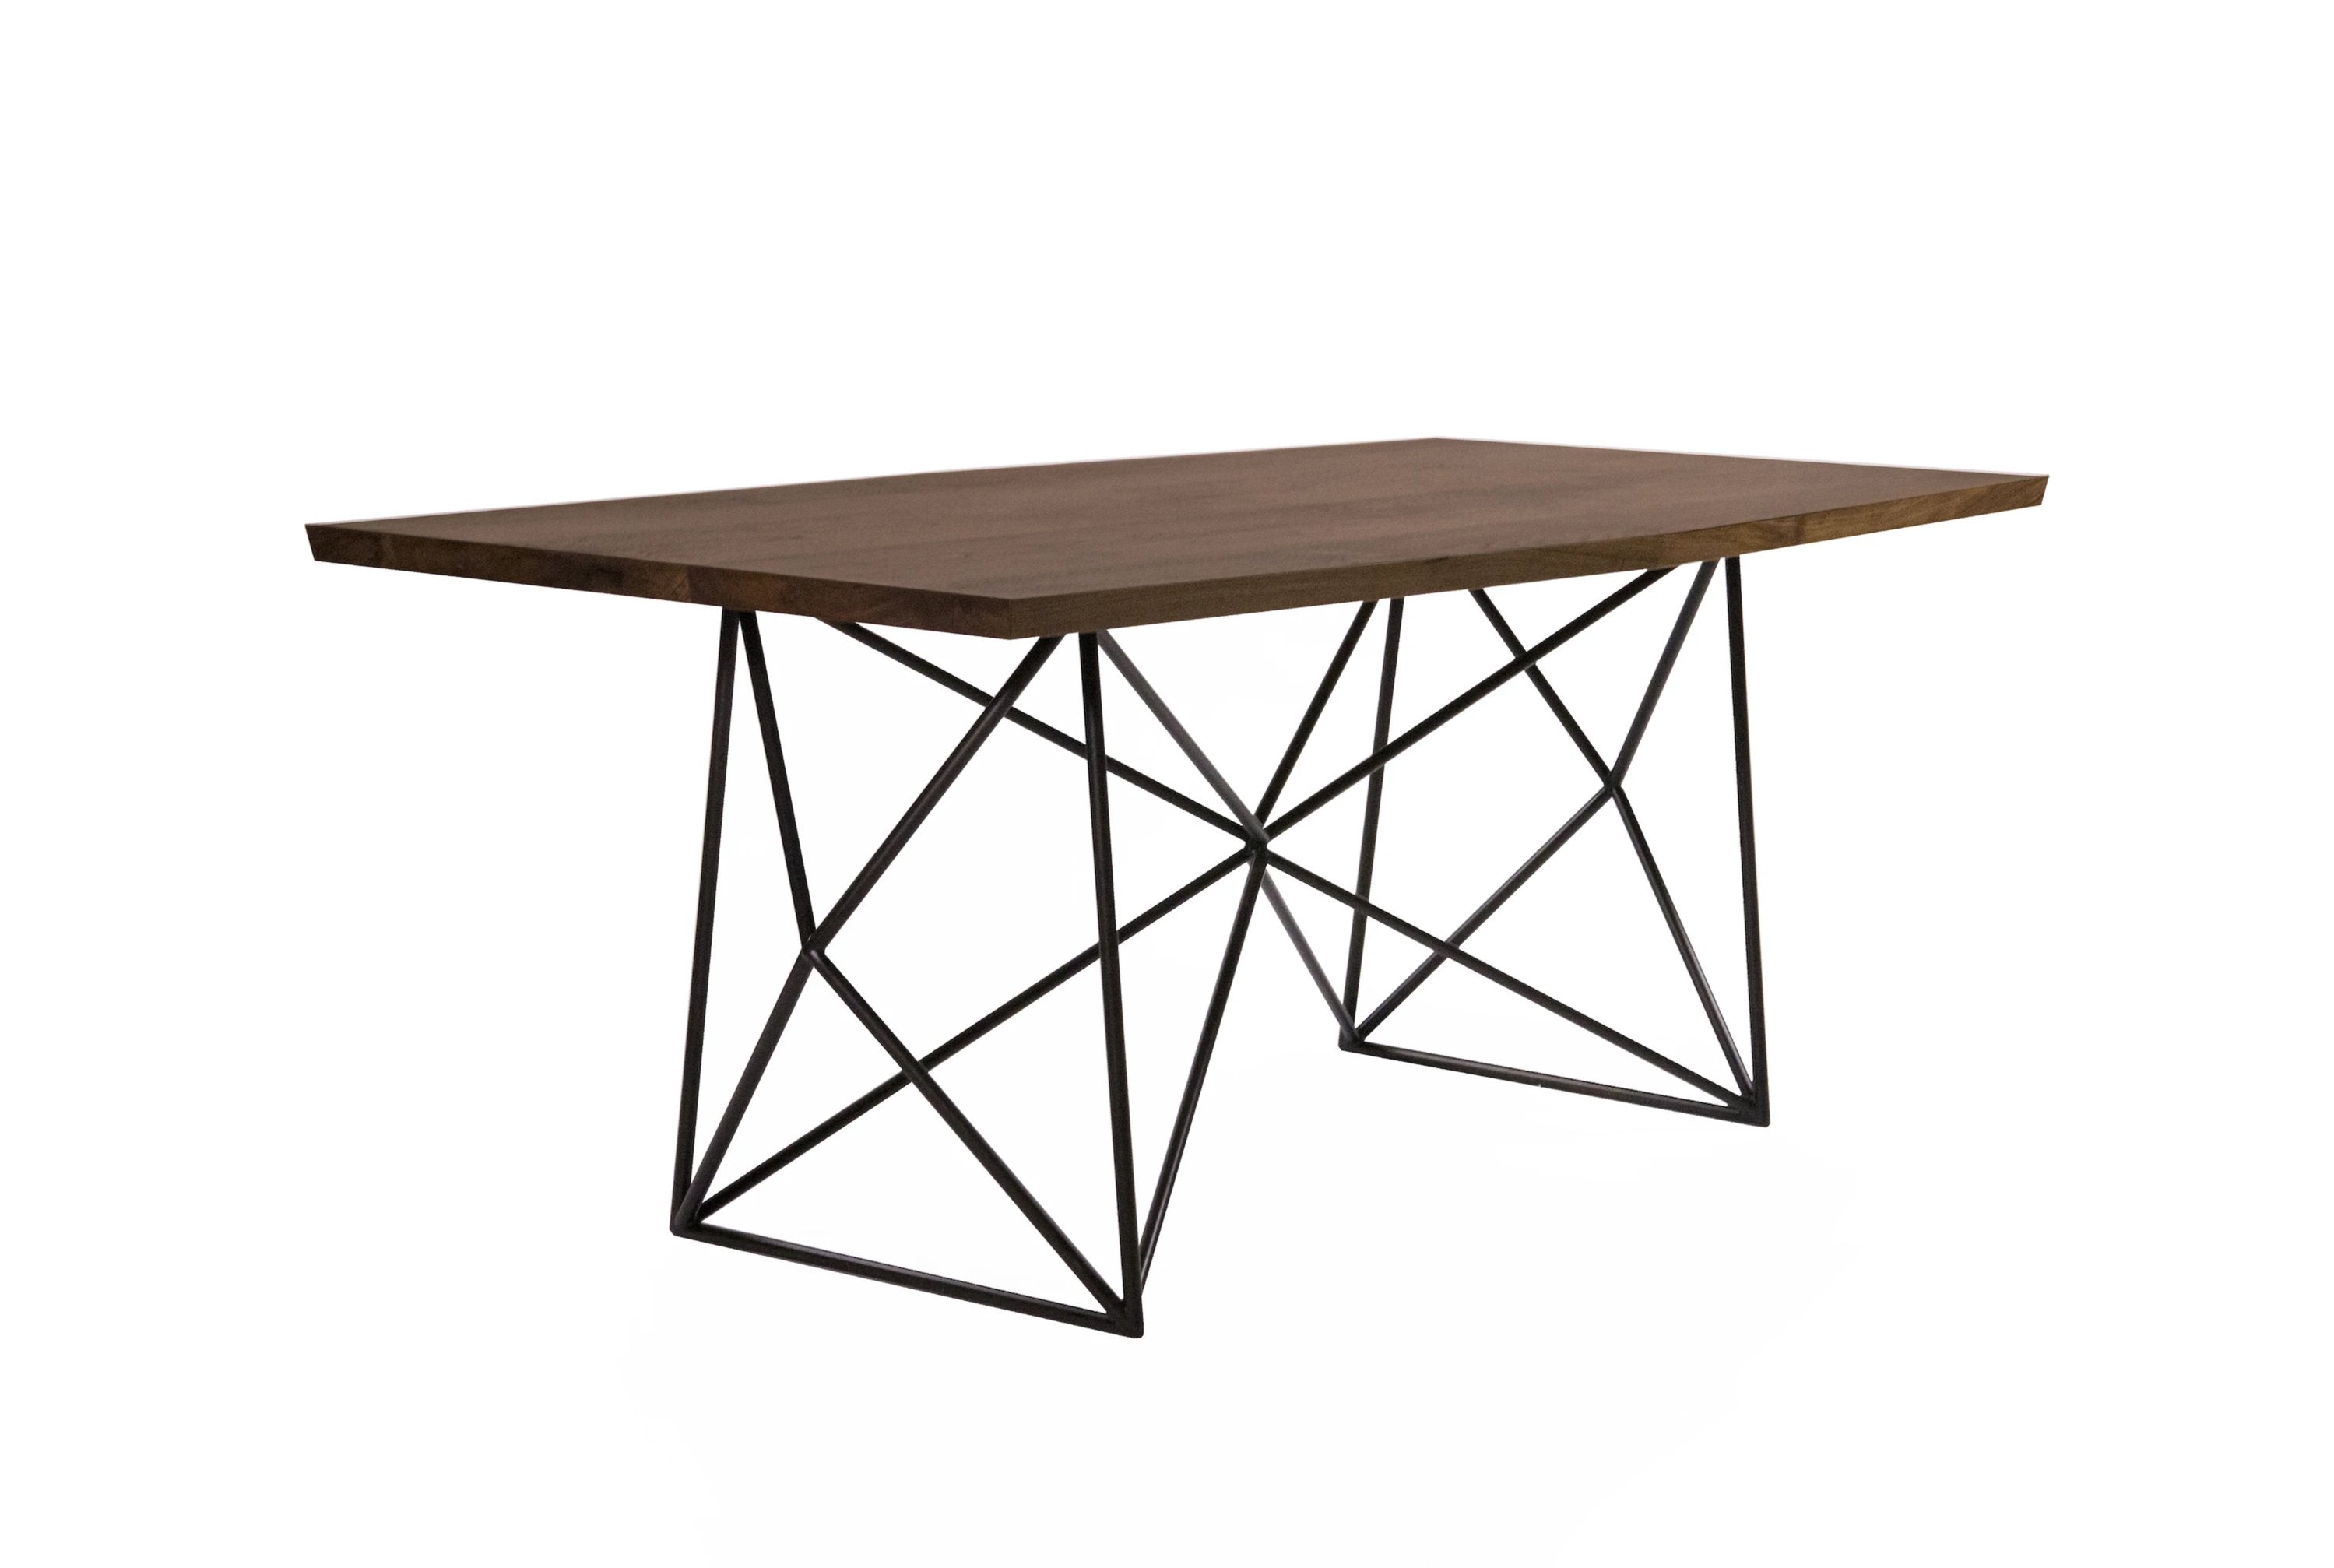 Fuller midcentury modern walnut wood Dining Table handcrafted by Hunt & Noyer in Michigan